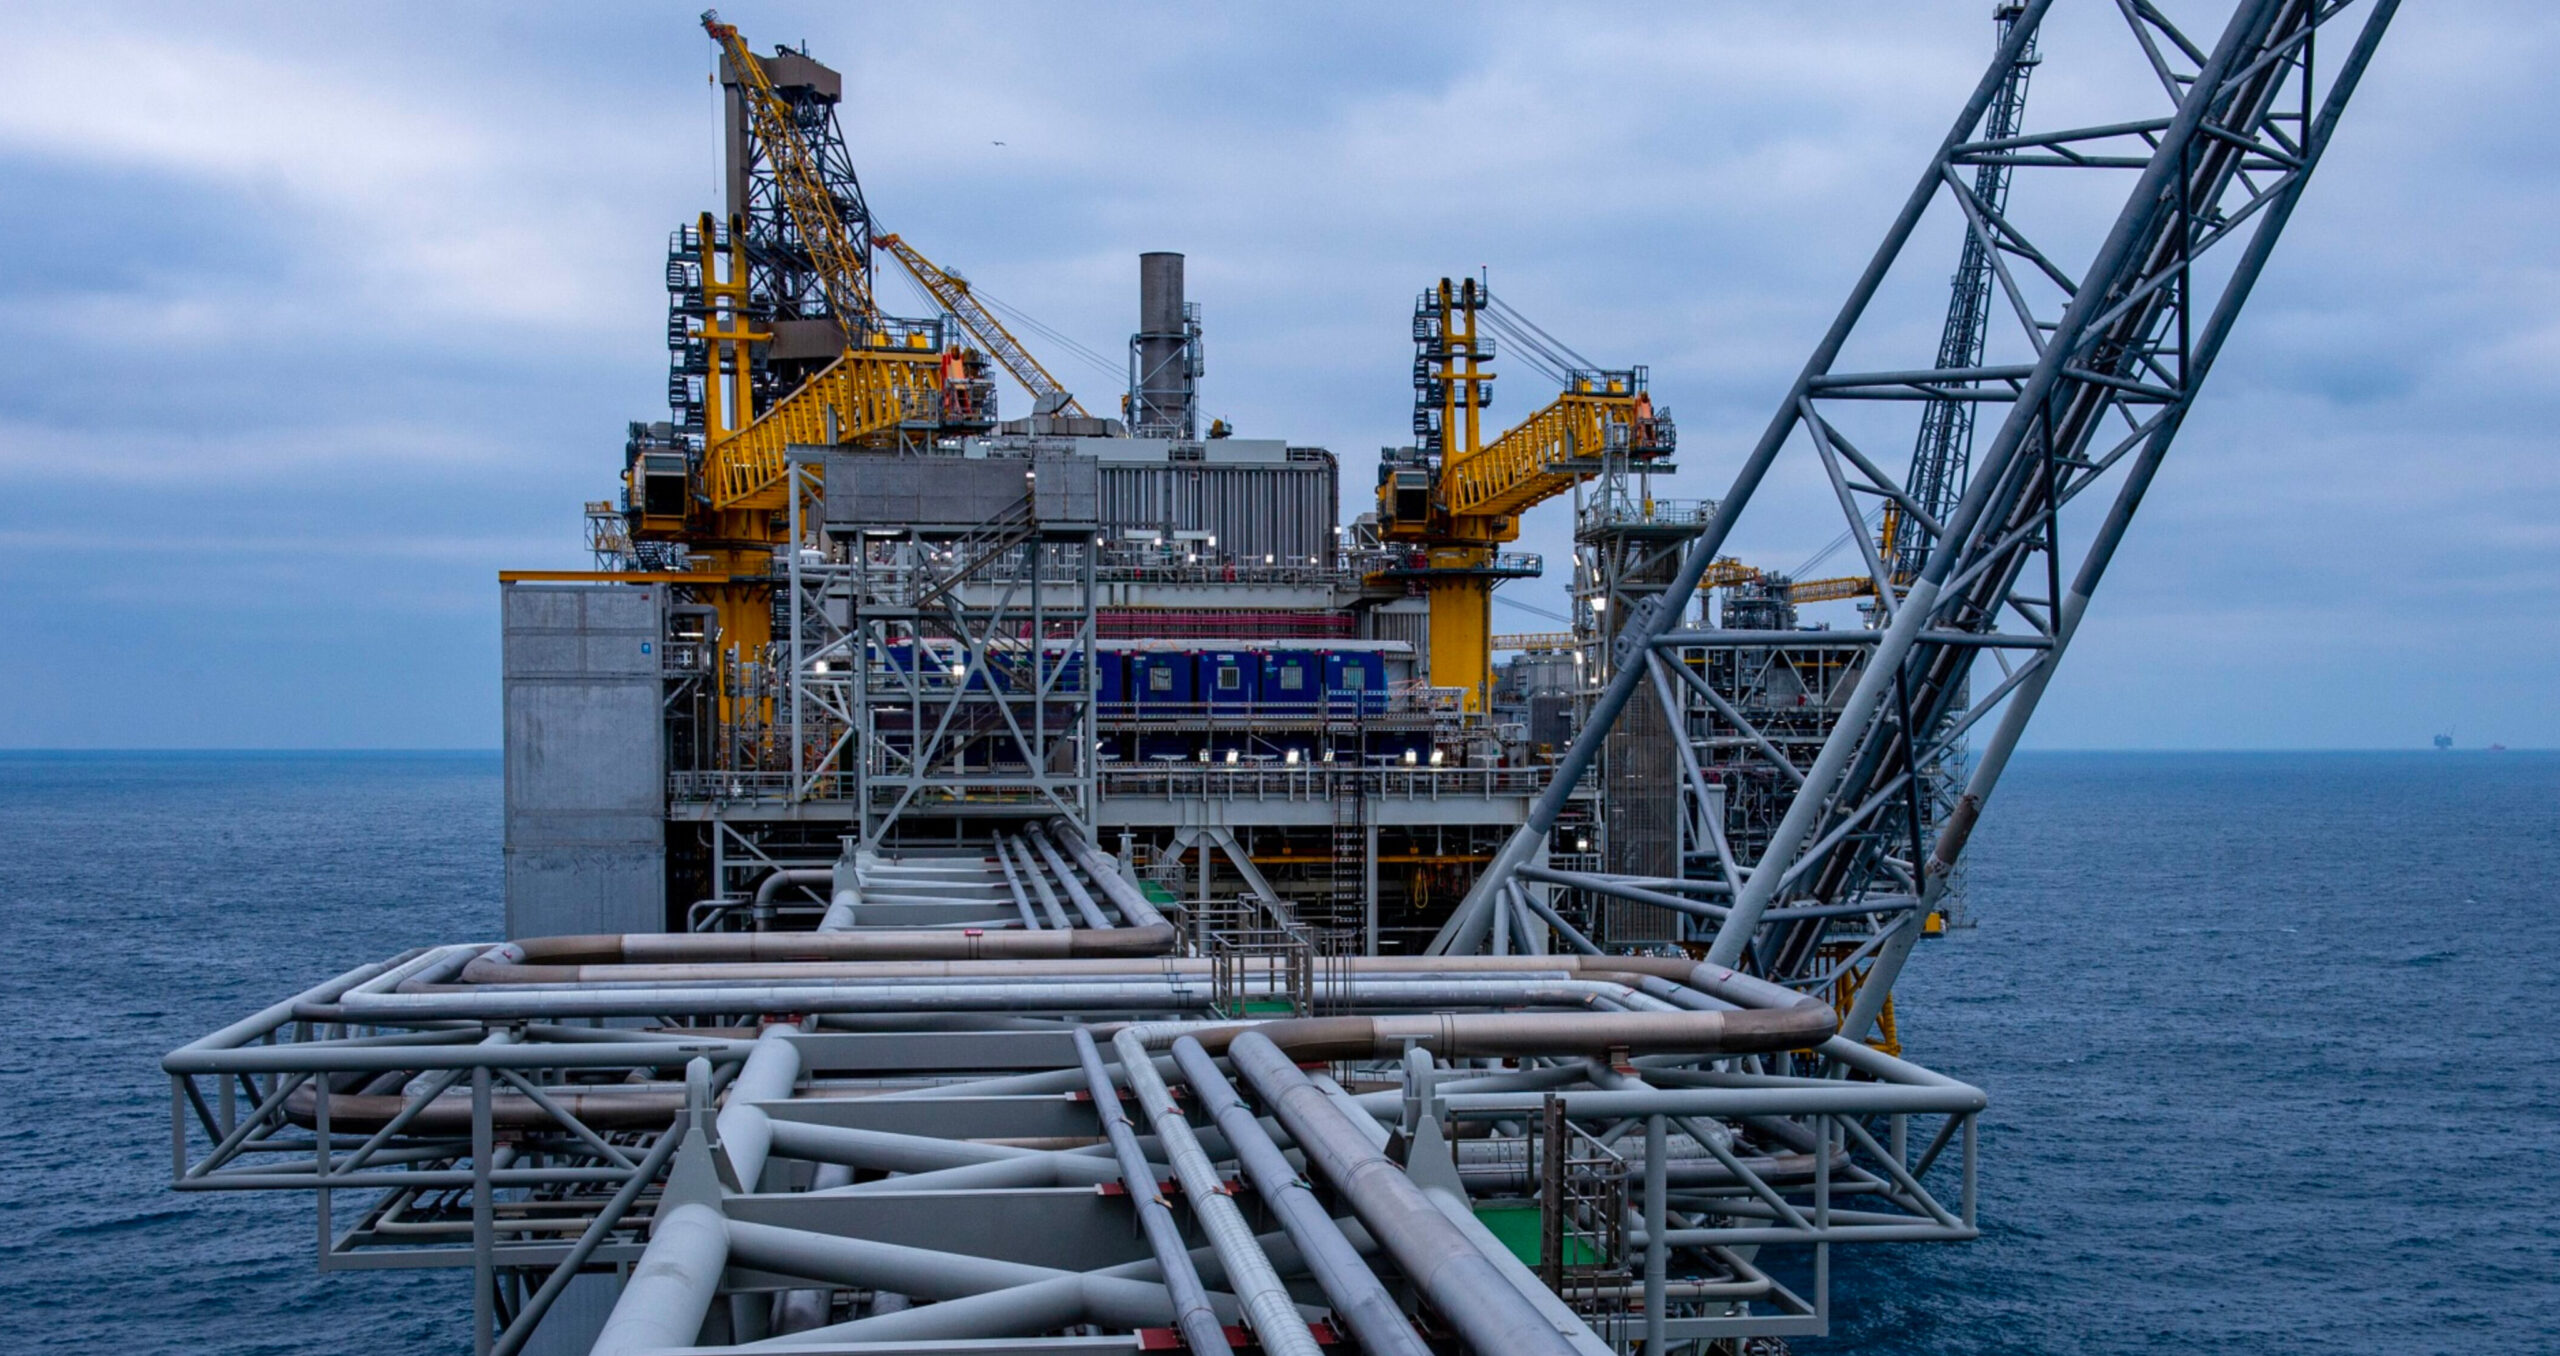 A North Sea oil platform. The UK has granted new oil and gas licences for drilling in its waters, but has admitted 80 per cent of production will be sold abroad. (Photo: Carina Johansen/Bloomberg) 